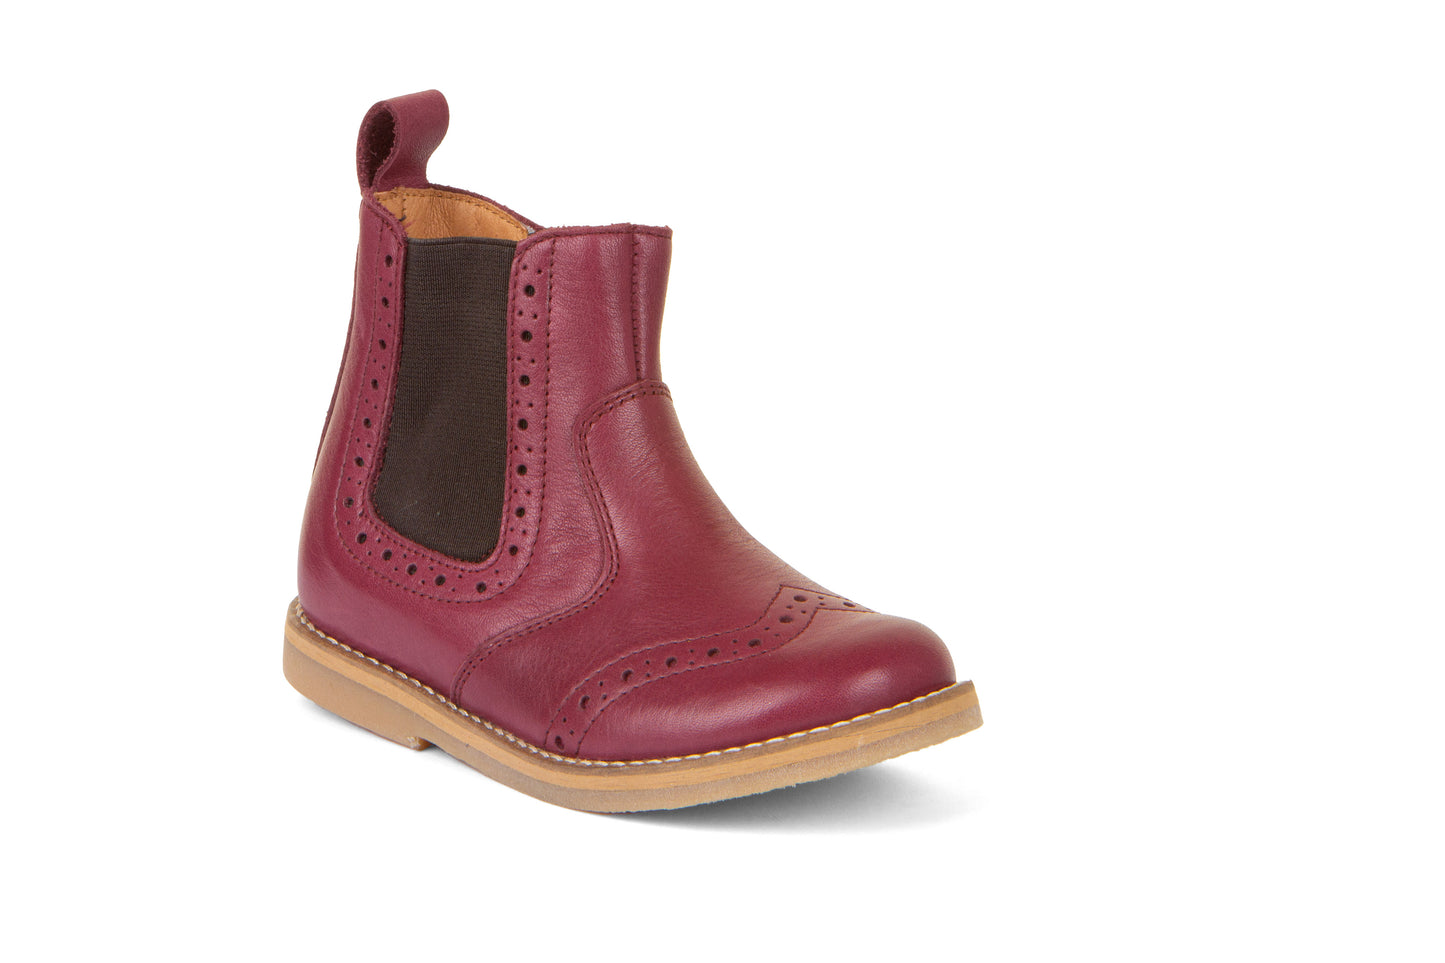 Chelys Brogue Chelsea Boot in Bordeaux Leather